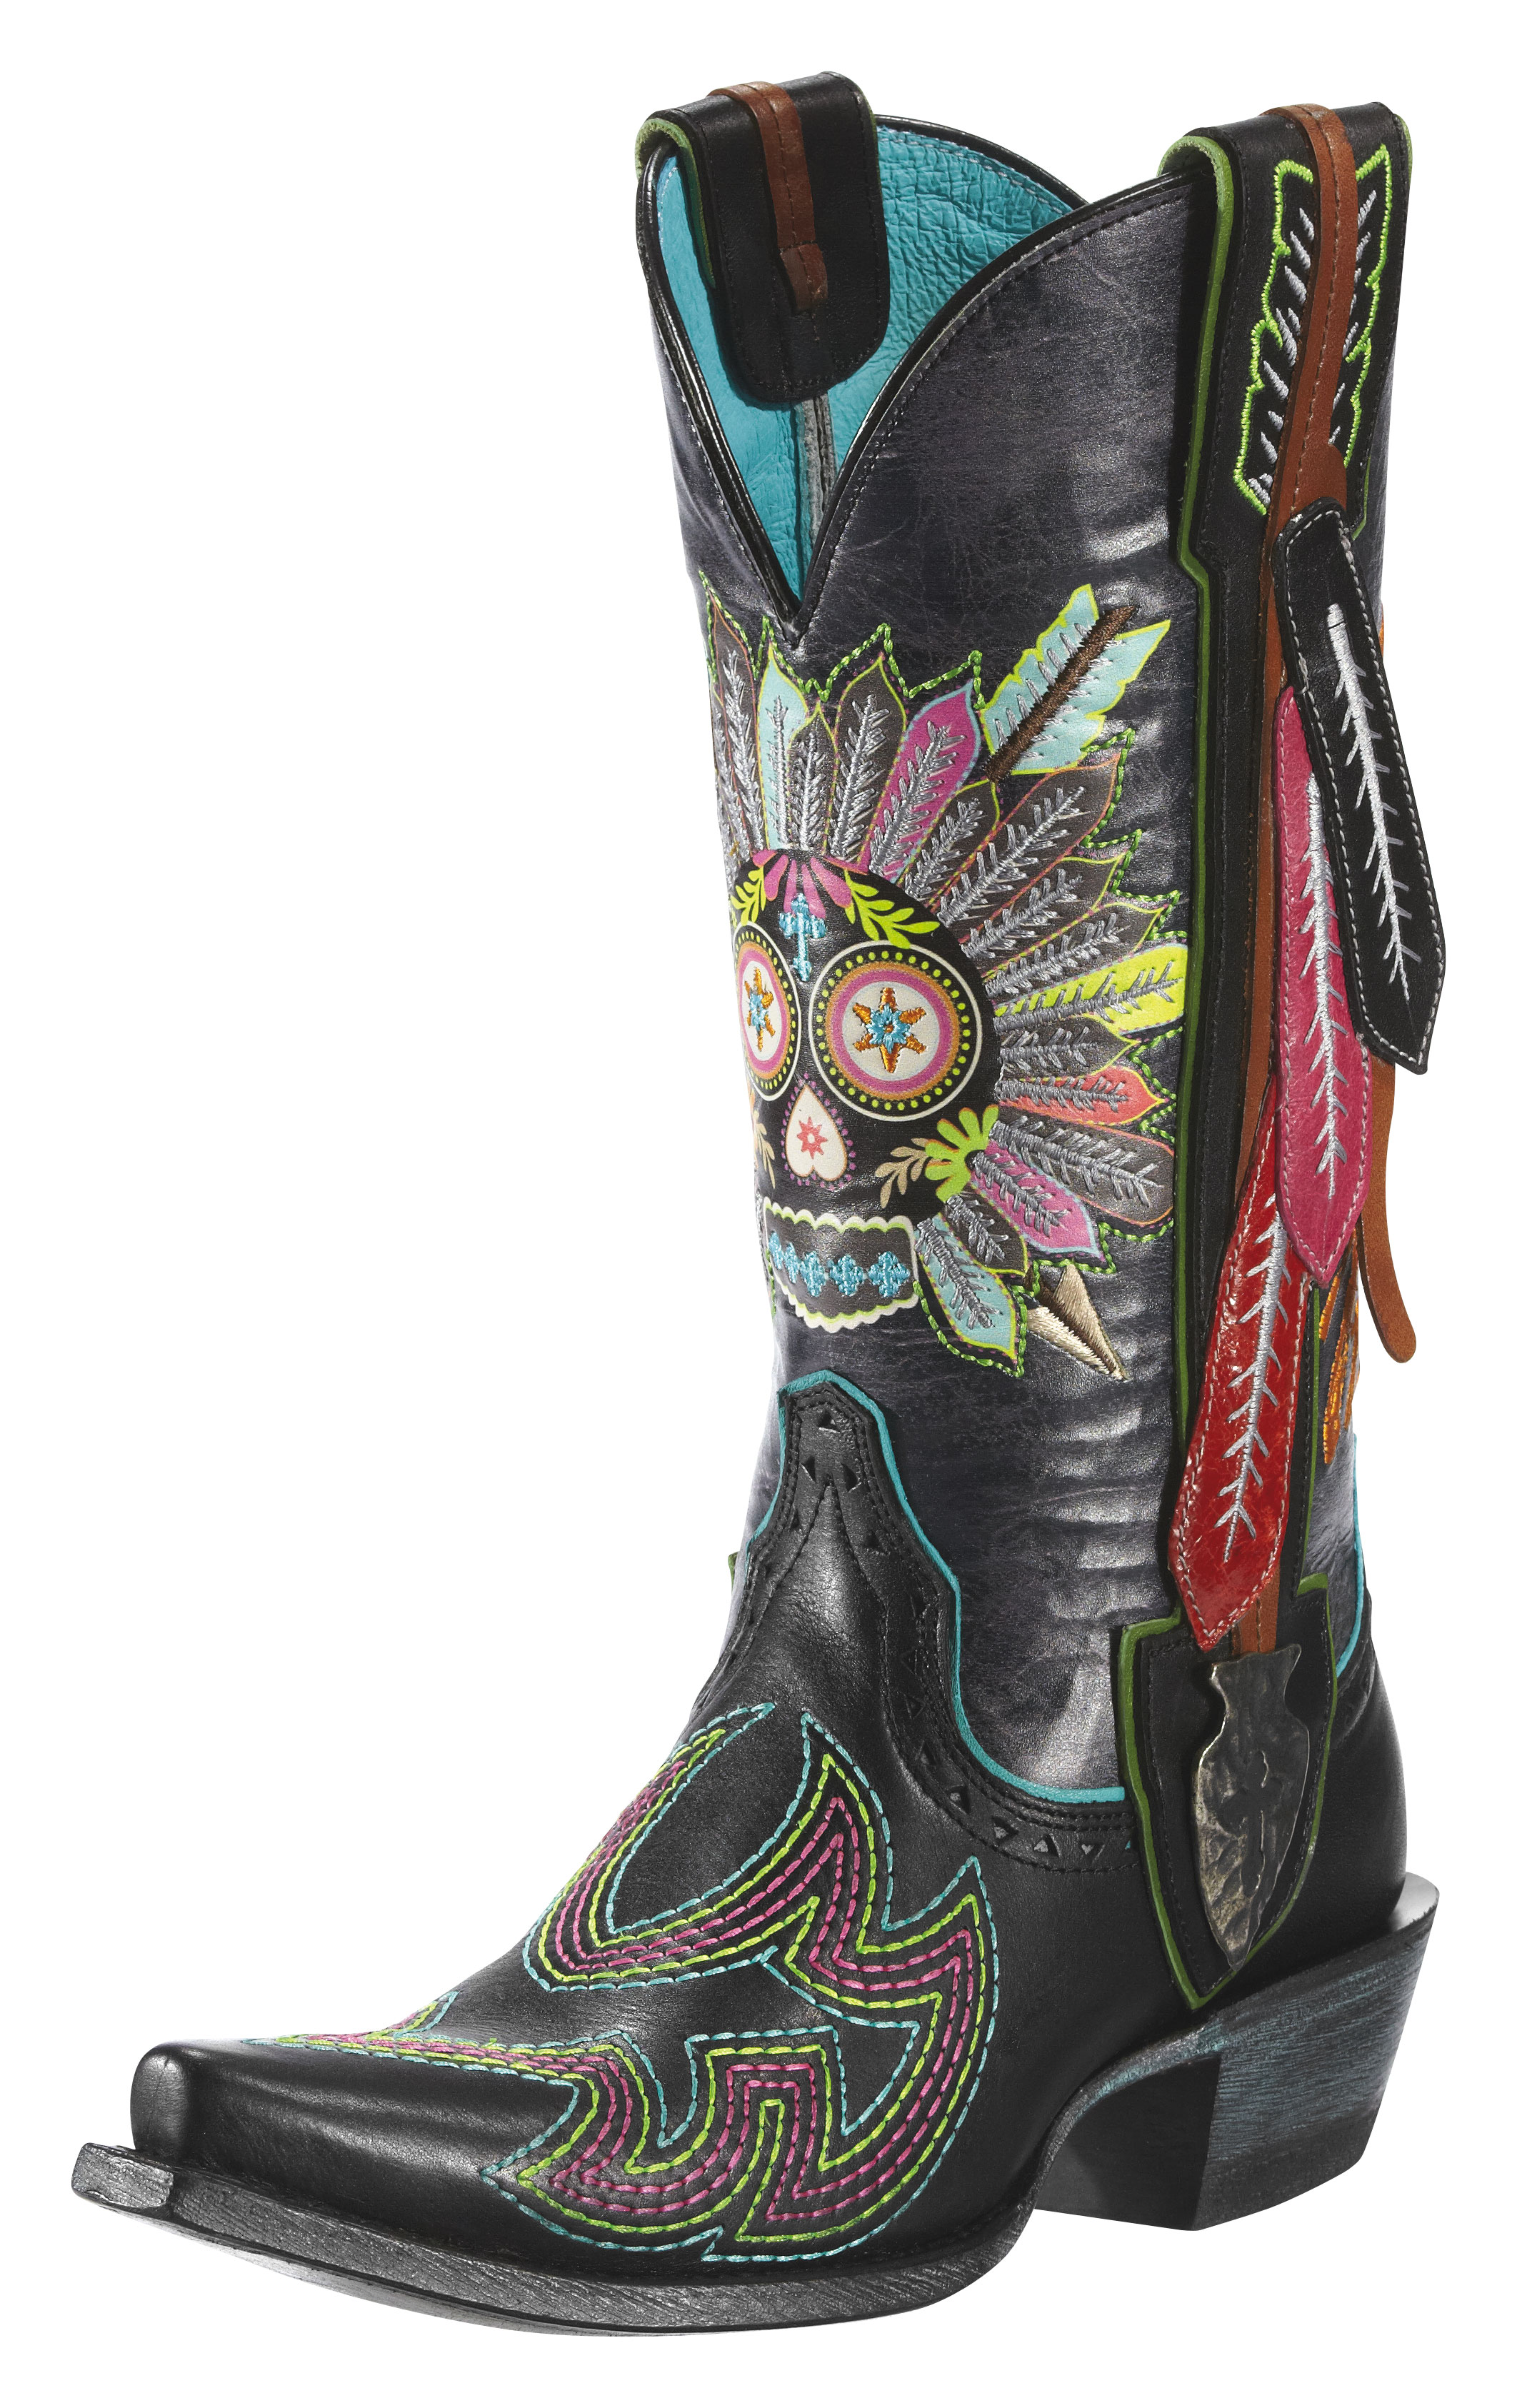 Ariat-Gypsy Soule Cowboy boots